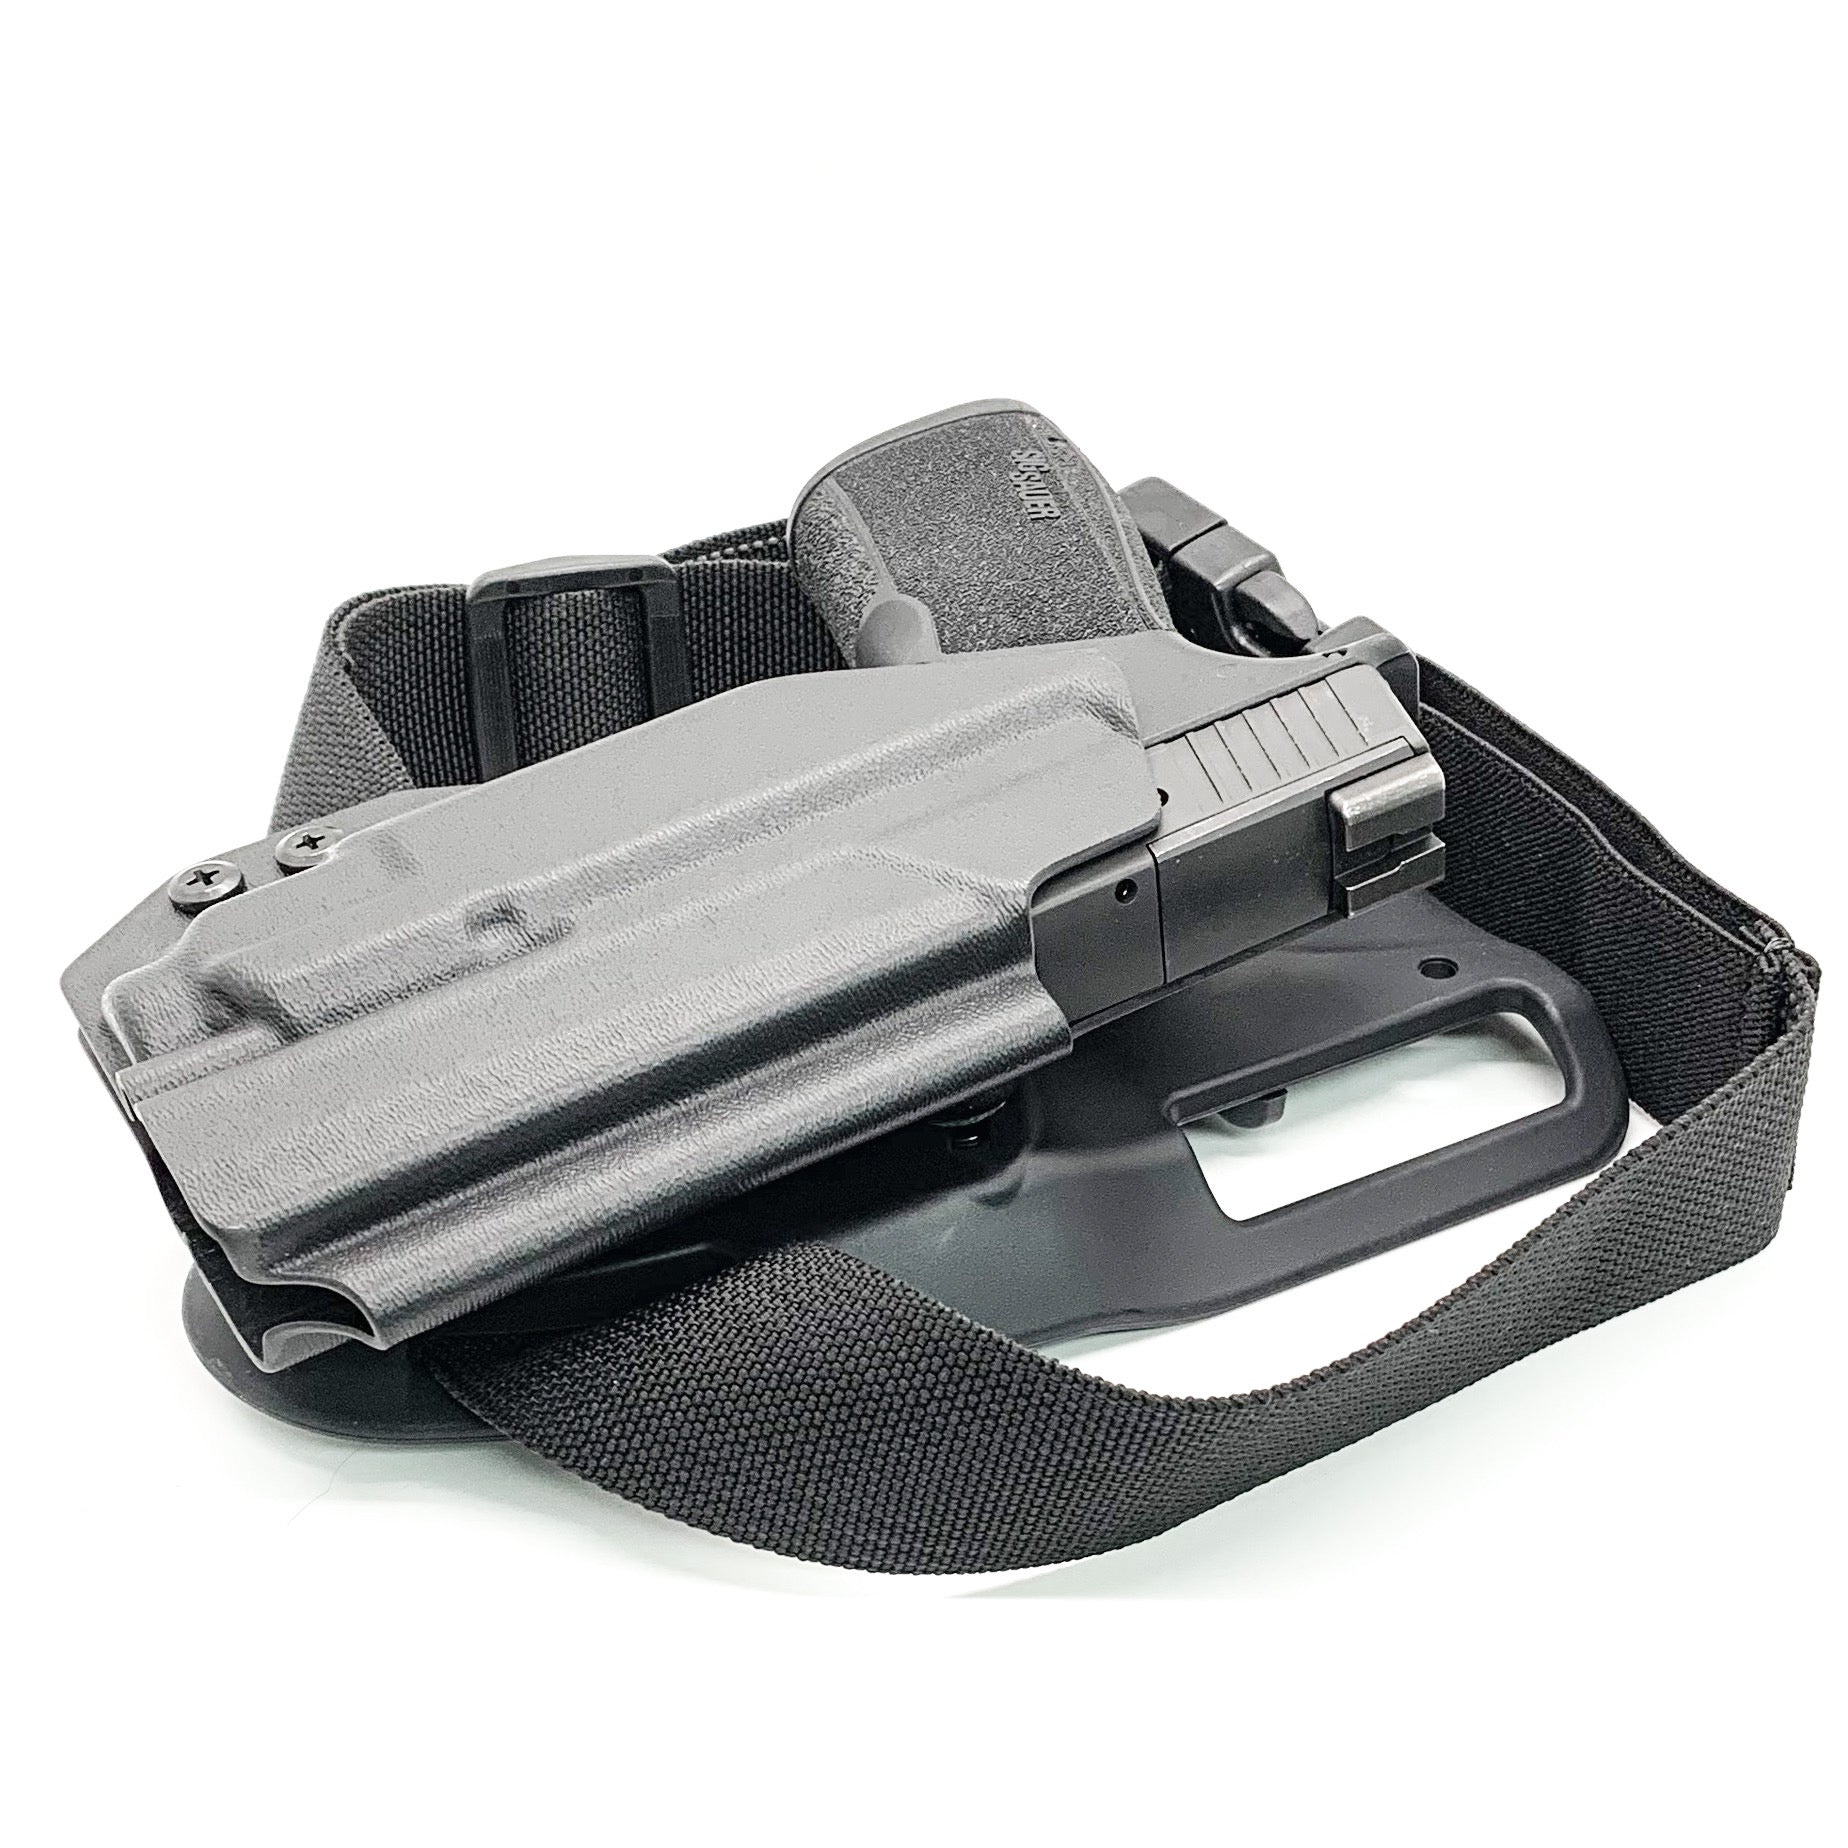 For the best Outside Waistband Duty & Competition Kydex Holster designed for the Sig Sauer P365-XMACRO with Streamlight TLR-8 Sub, shop Four Brothers Holsters.  Full sweat guard, adjustable retention, minimal material & smooth edges to reduce printing, open muzzle, cleared for red dot sights. Made in the USA. 